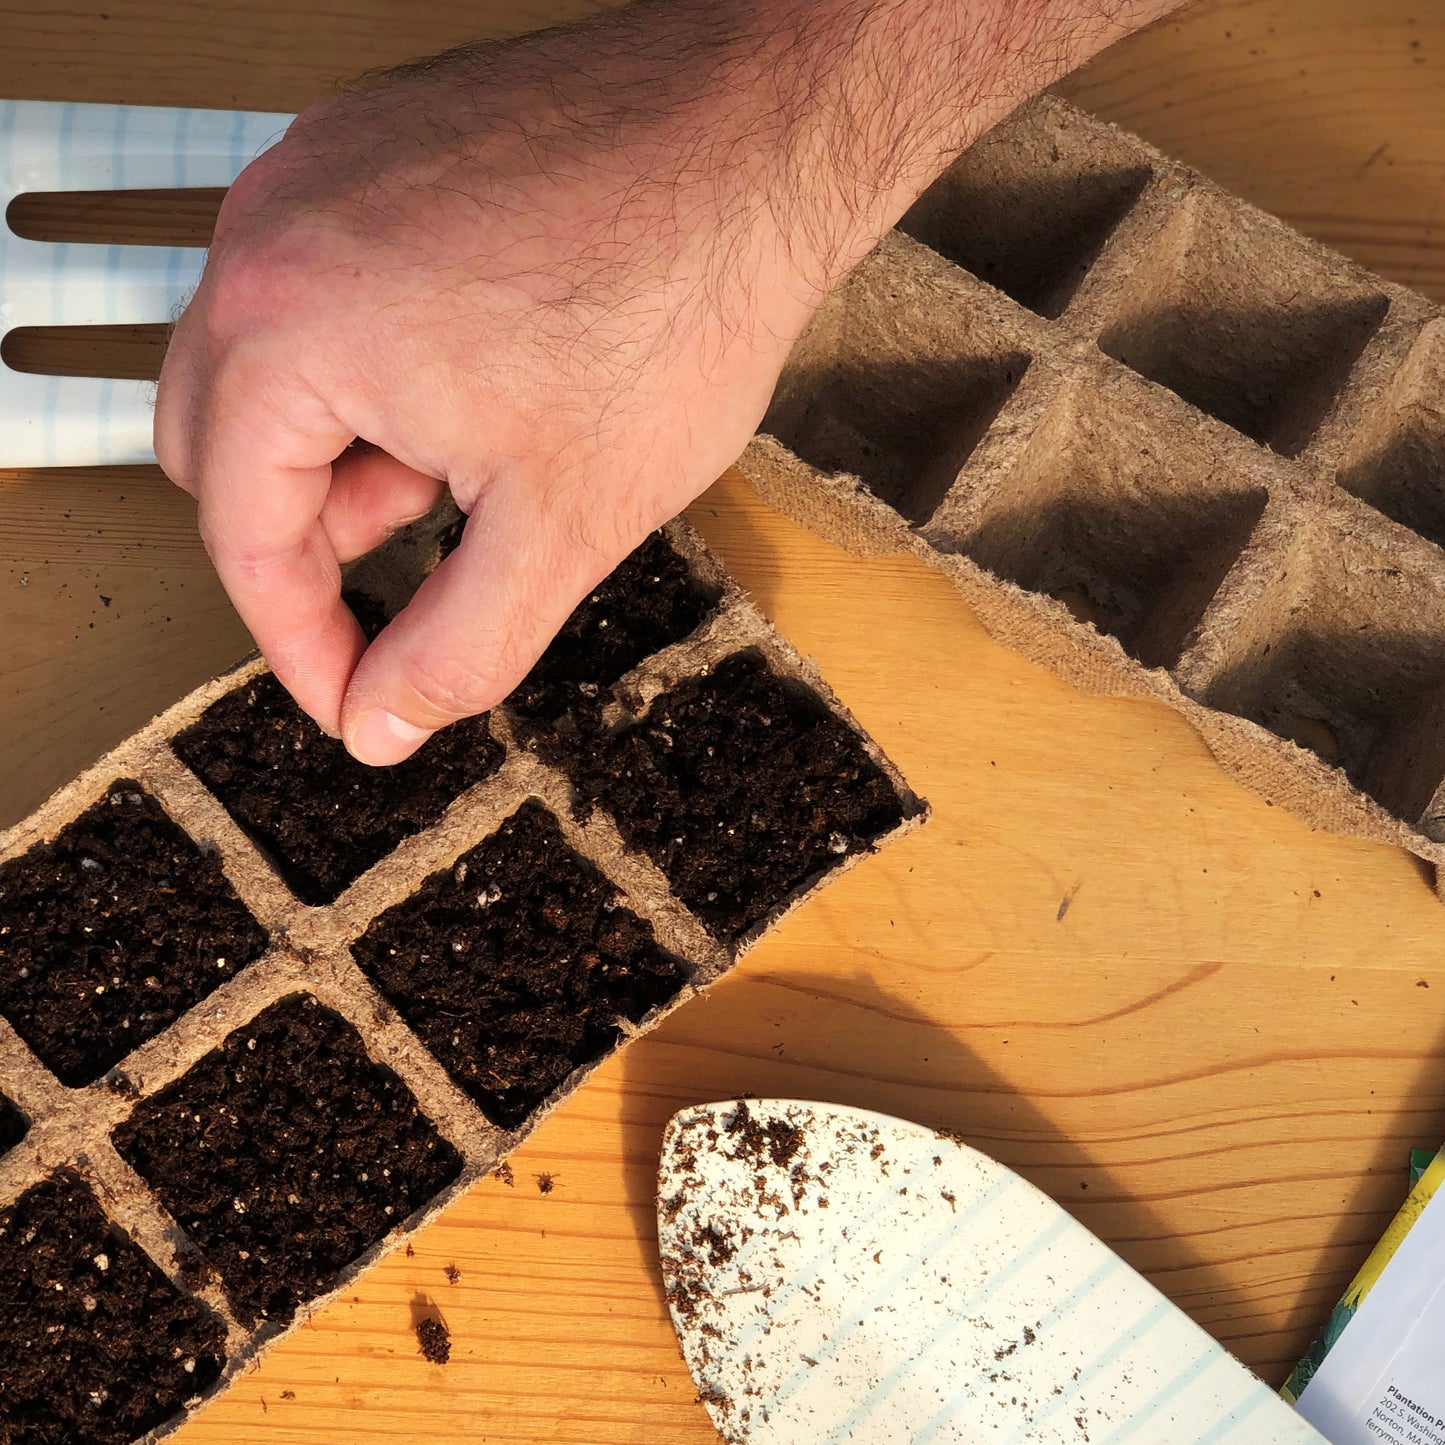 Start your California Wonder Bell Pepper seeds in Jiffy biodegradable peat strips filled with sowing mix.